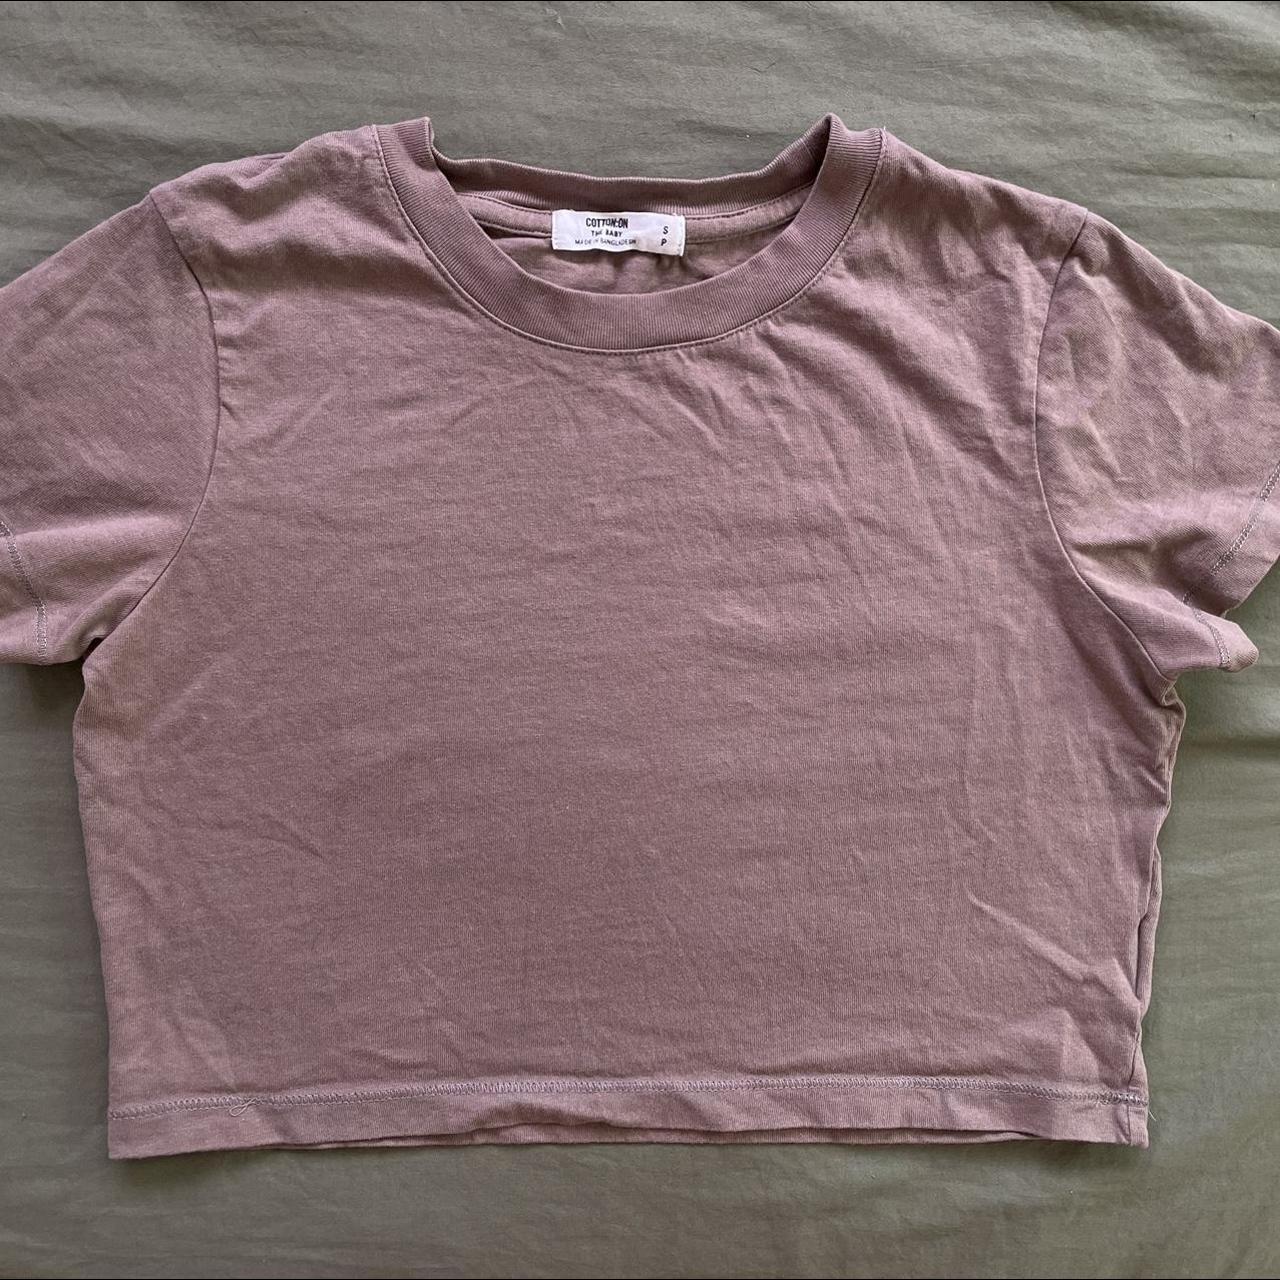 Cotton On Women's Pink and Brown T-shirt (4)